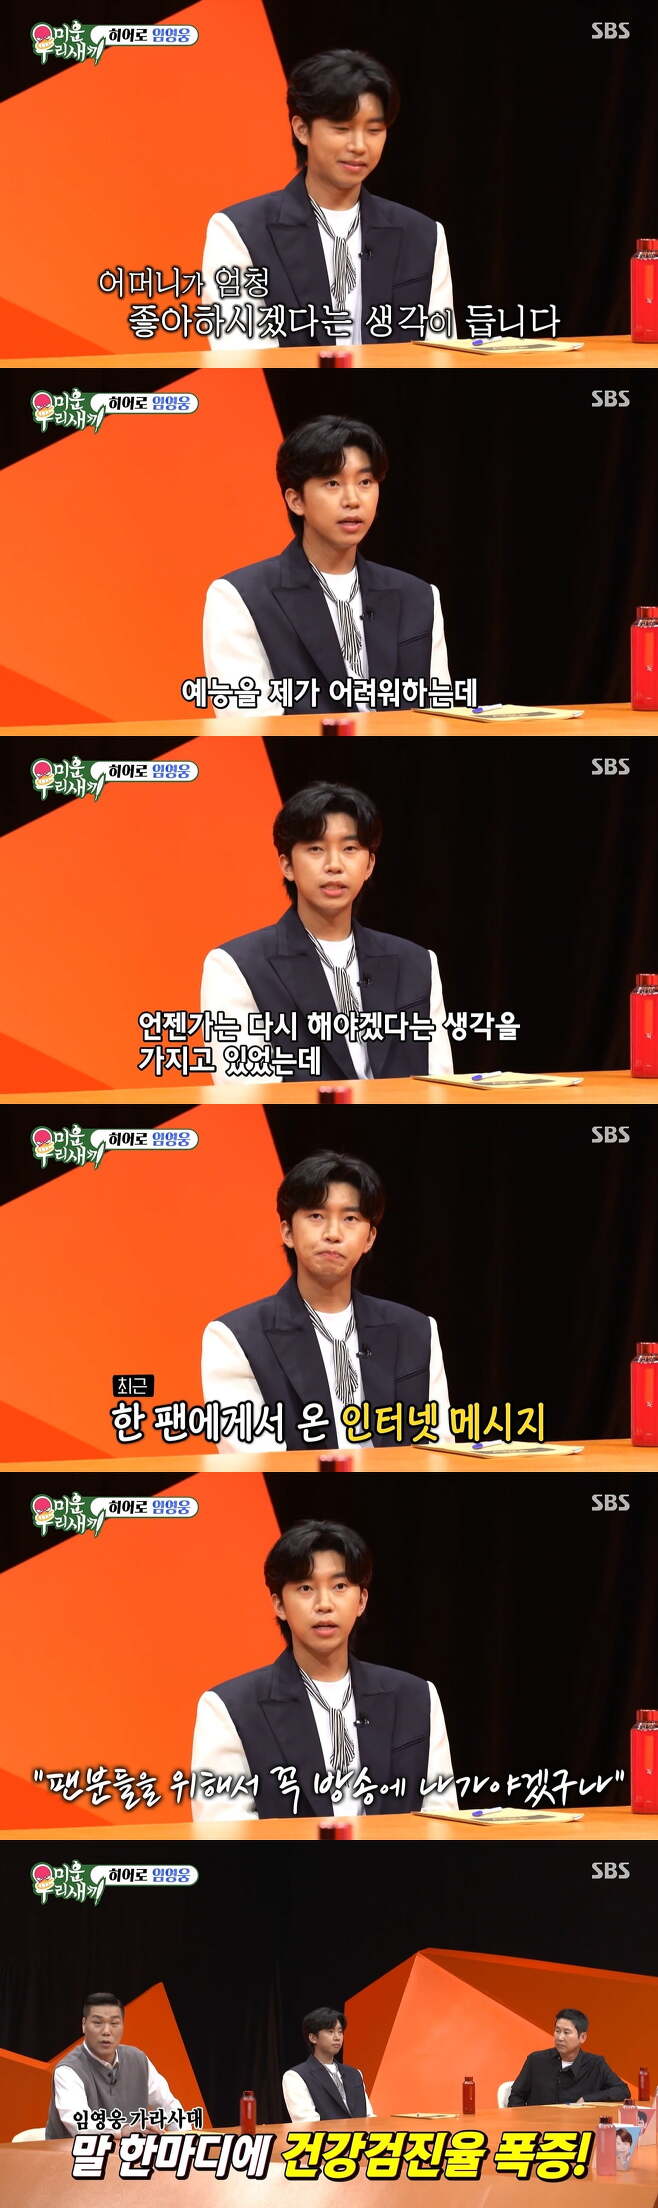 Broadcaster Shin Dong-yup said that singer Lim Young-woong was selected as the best star of fan service by defeating IU, Son Heung-min.Lim Young-woong appeared as a special MC on SBS My Little Old Boy, which aired on the 17th.On the same day, Seo Jang-hoon said, My mother likes it very much today, but my mother has been in bedside for quite a while. There is an application that keeps listening to Lim Young-woong on Mothers cell phone.If nothing else, you watch the show Im on. I think youre going to love it.Lim Young-woong commented on the occasion of appearing in My Little Old Boy, I had difficulty in entertainment, but I had the idea that I should do it again someday. I recently got a call from a fan.He was the son of a fan. My mother was a fan, and he said he was waiting for the TV to come out and died first.I found that there were not one or two such messages. I had the idea that I had to go on the air, and my grandmother said, Lim Young-woong is my Little Old Boy.You just gave it to me again, he added.Seo Jang-hoon said, Lim Young-woong said that the health checkup rate exploded because of a word. Lim Young-woong said, I usually tell my fans to take care of their health.Shin Dong-yup said, This is a good influence.In addition, Seo Jang-hoon asked, What is a buzzword made by Lim Young-woong? Lim Young-woong said, I did not mean to make it.When I was shooting on YouTube, I always said Be healthy and happy at the end, but I wanted to finish it quickly because I said the same thing every time, so I shortened it to Good luck. Those who watch it now wrote it like a buzzword. Shin Dong-yup said, IU, Son Heung-min was voted as the best fan service star. The fans favorite service is called hand kiss.Lim Young-woong, who heard them, kissed his hand for the Movengers, saying, Mothers always want to be healthy.In addition, Shin Dong-yup said, Getting a concert ticket is like picking a star in the sky. If you get a lot, you become a filial son and a filial daughter, and if you dont, you become an filial son and a filial daughter.Lim Young-woong said, I feel good and I am grateful.Seo Jang-hoon asked, Have you ever tried your own concert ticketing?Lim Young-woong said, How hard is it because they say its so hard? I tried it. As soon as I started, there were 500,000 people waiting. I couldnt wait at all.Seo Jang-hoon said, I think we should raise the venue later and do it at the main stadium. To get more fans. Lim Young-woong said, I am thinking about it.Also, because the ticketing became picketing, some fans said, Do not do it in a small place but in a big place. 